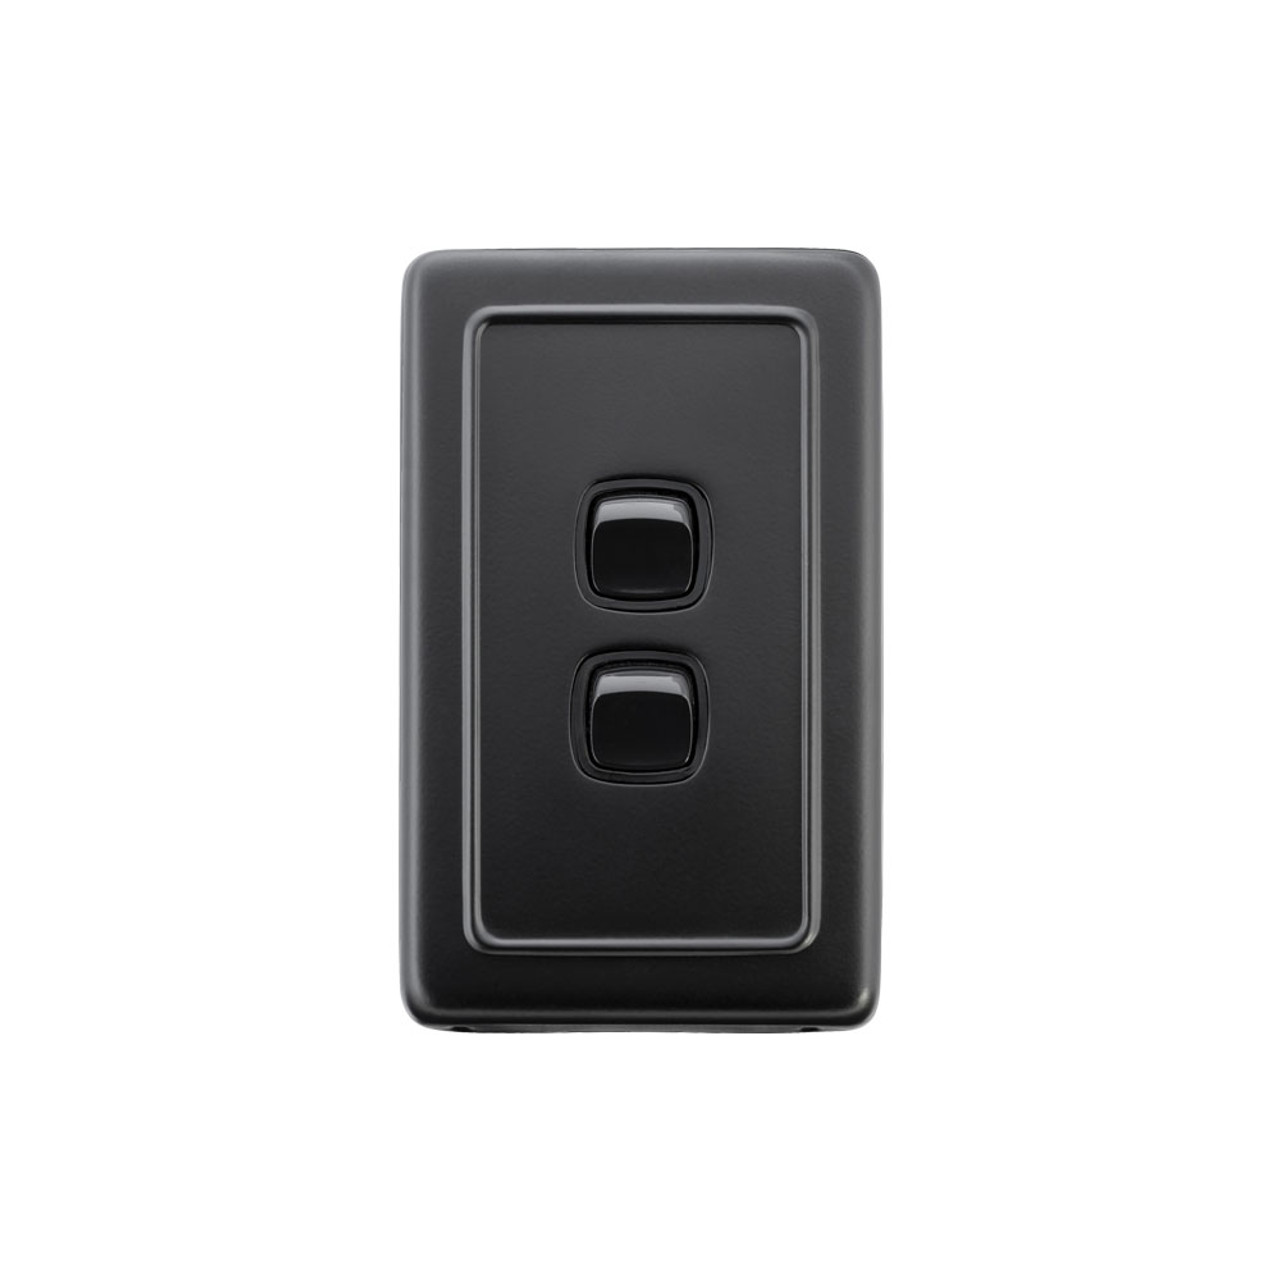 2 Gang Flat Plate Heritage Light Switches - Matte Black with Black Rocker